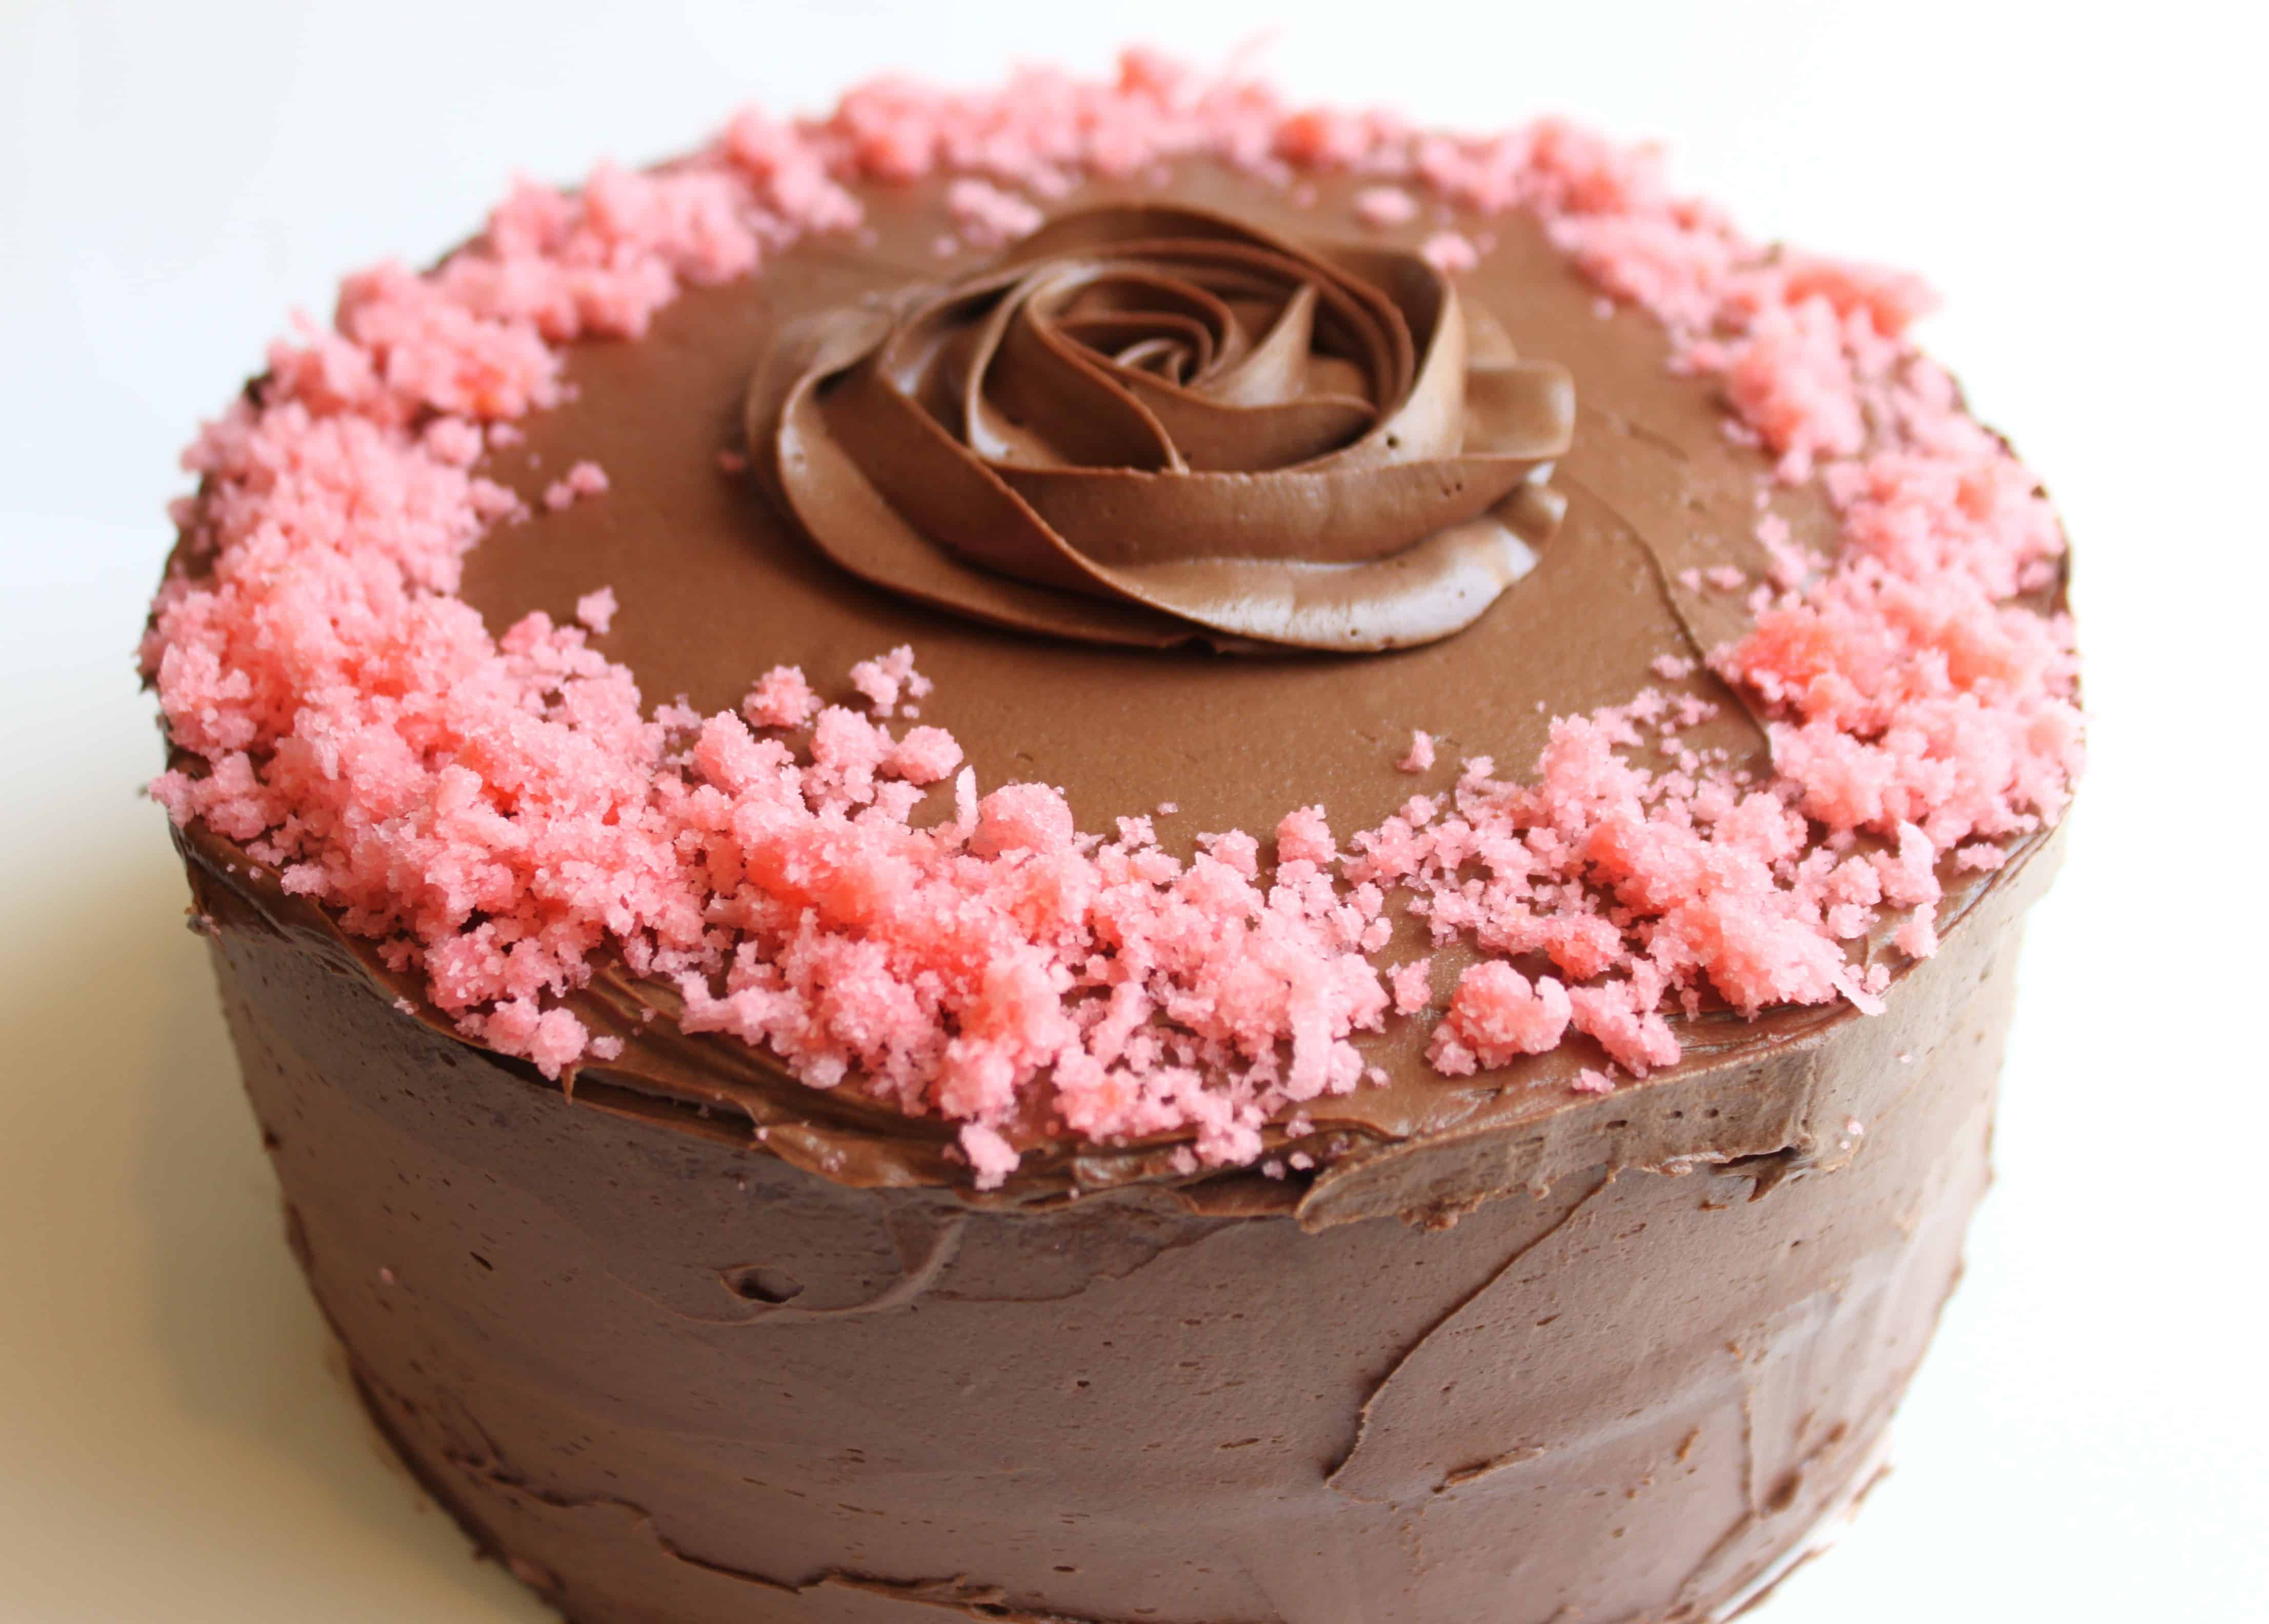 Strawberry cake-chocolate buttercream frosting | Created by Diane